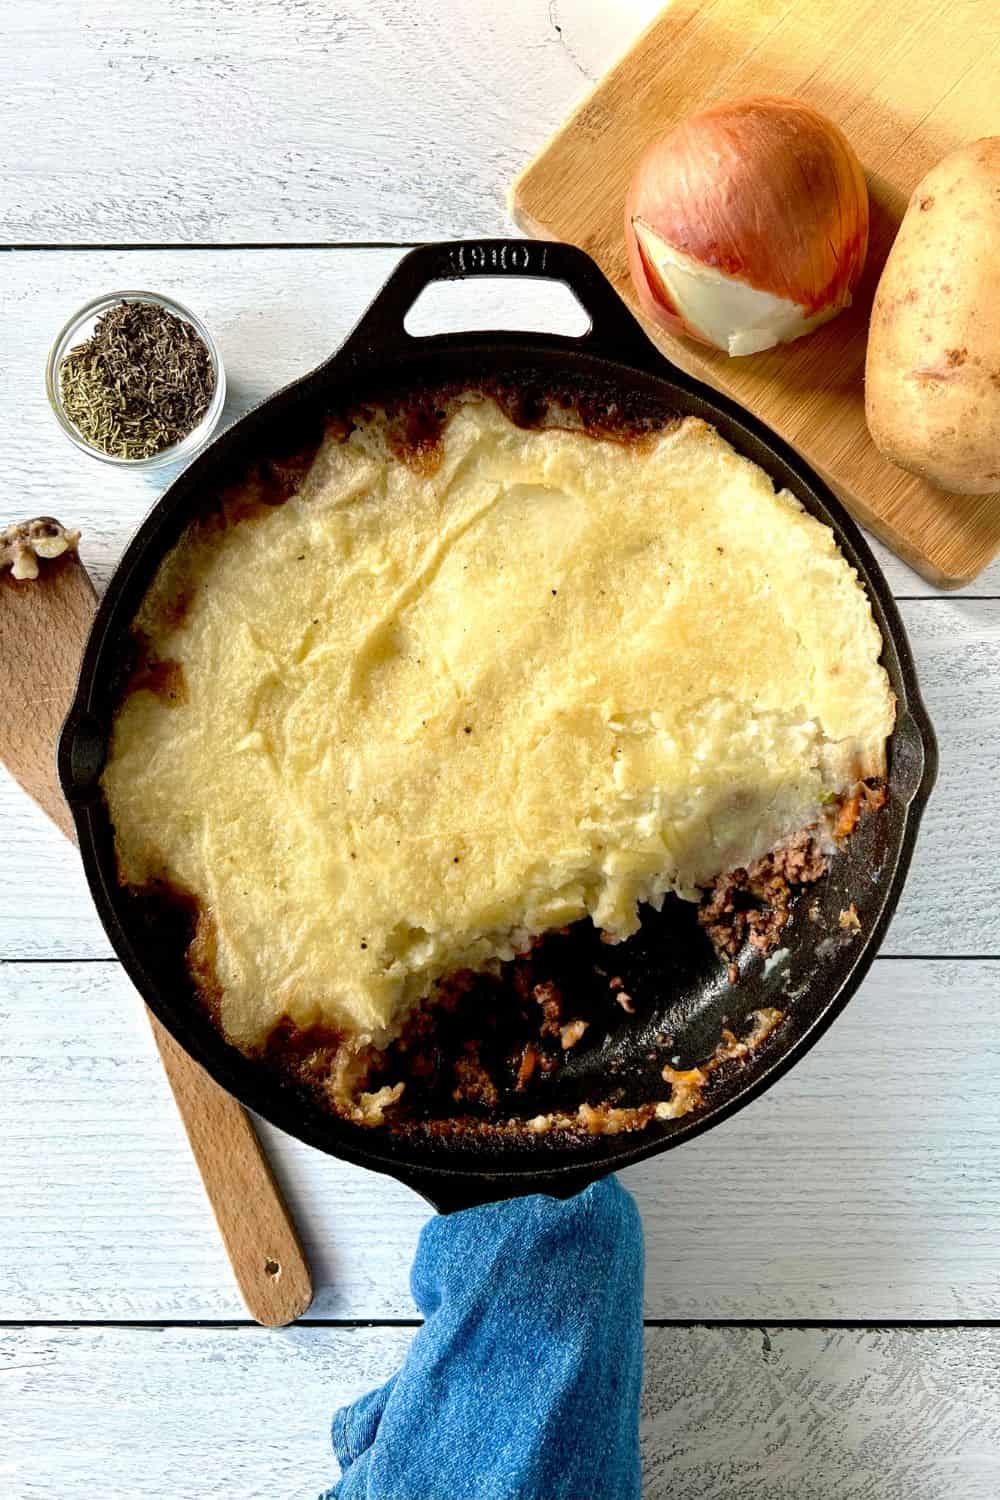 Healthy Shepherd's Pie in a cast iron skillet with a denim towel wrapped around its handle.